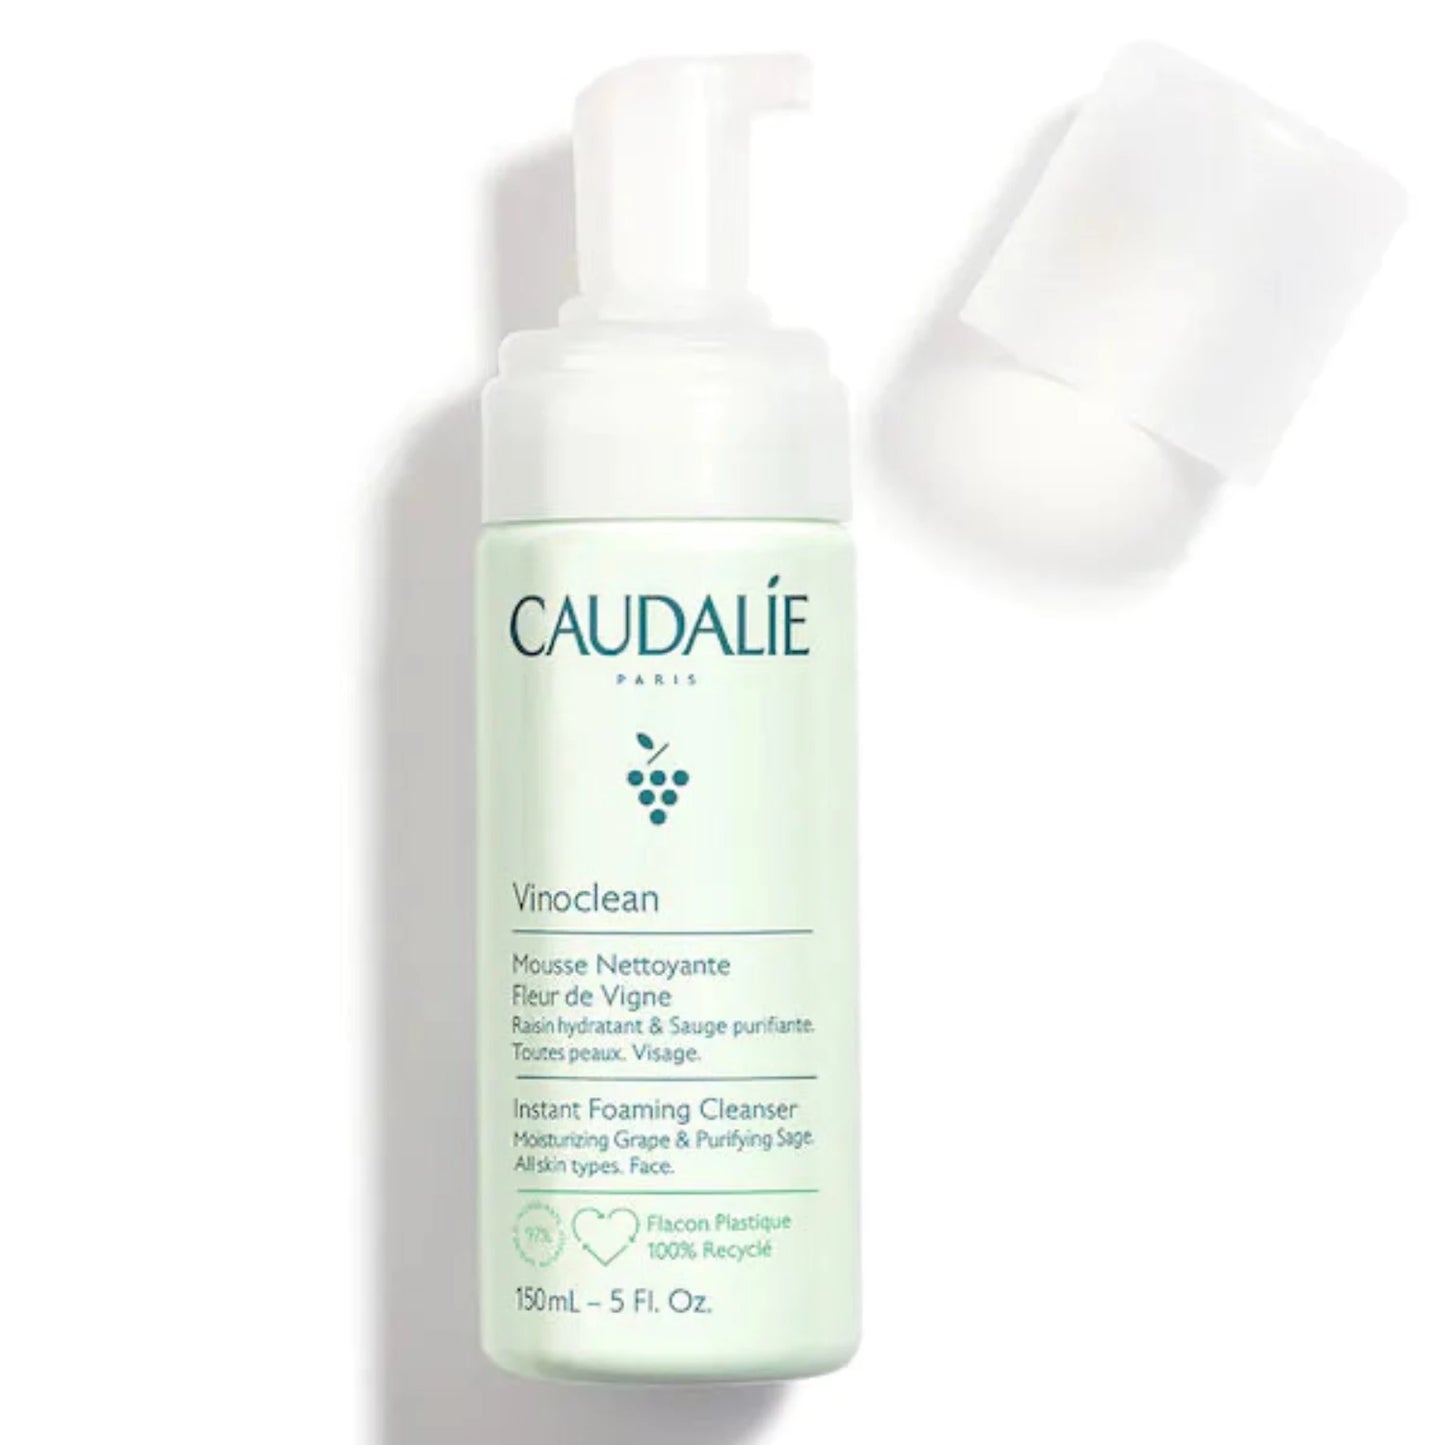 Caudalie Vinoclean Foaming Cleanser Soap-free and featuring an ultra-gentle cleansing base, this daily cleanser offers antioxidant-rich cleansing that nourishes and softens skin, even the most sensitive.